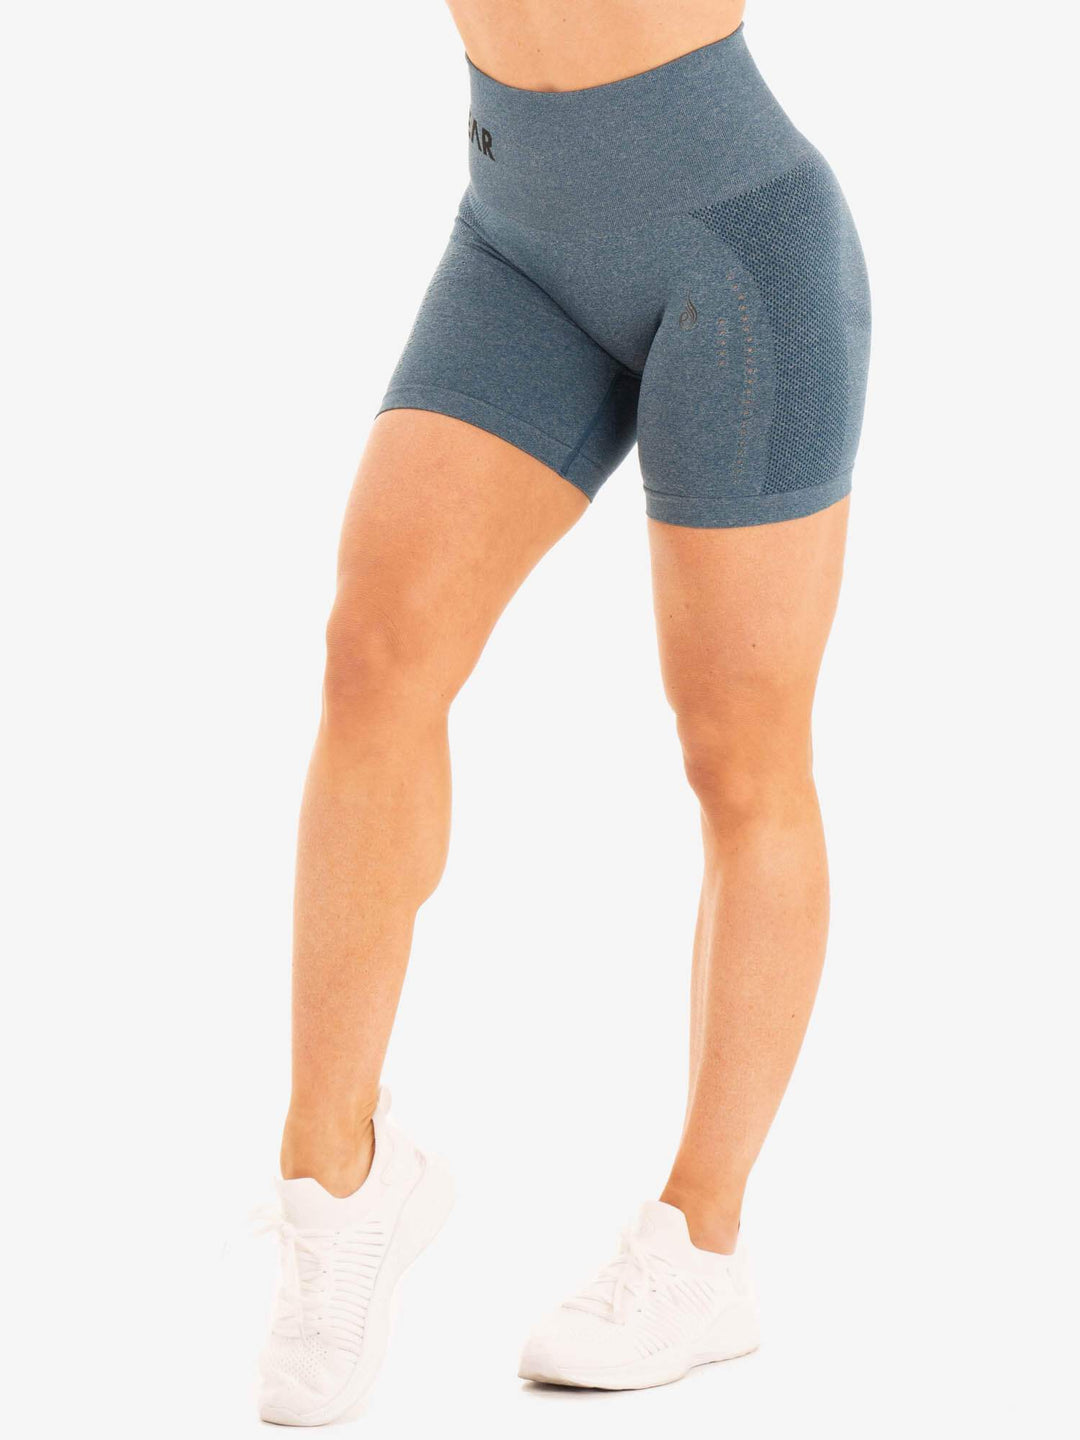 Seamless Staples Shorts - Teal Marl Clothing Ryderwear 